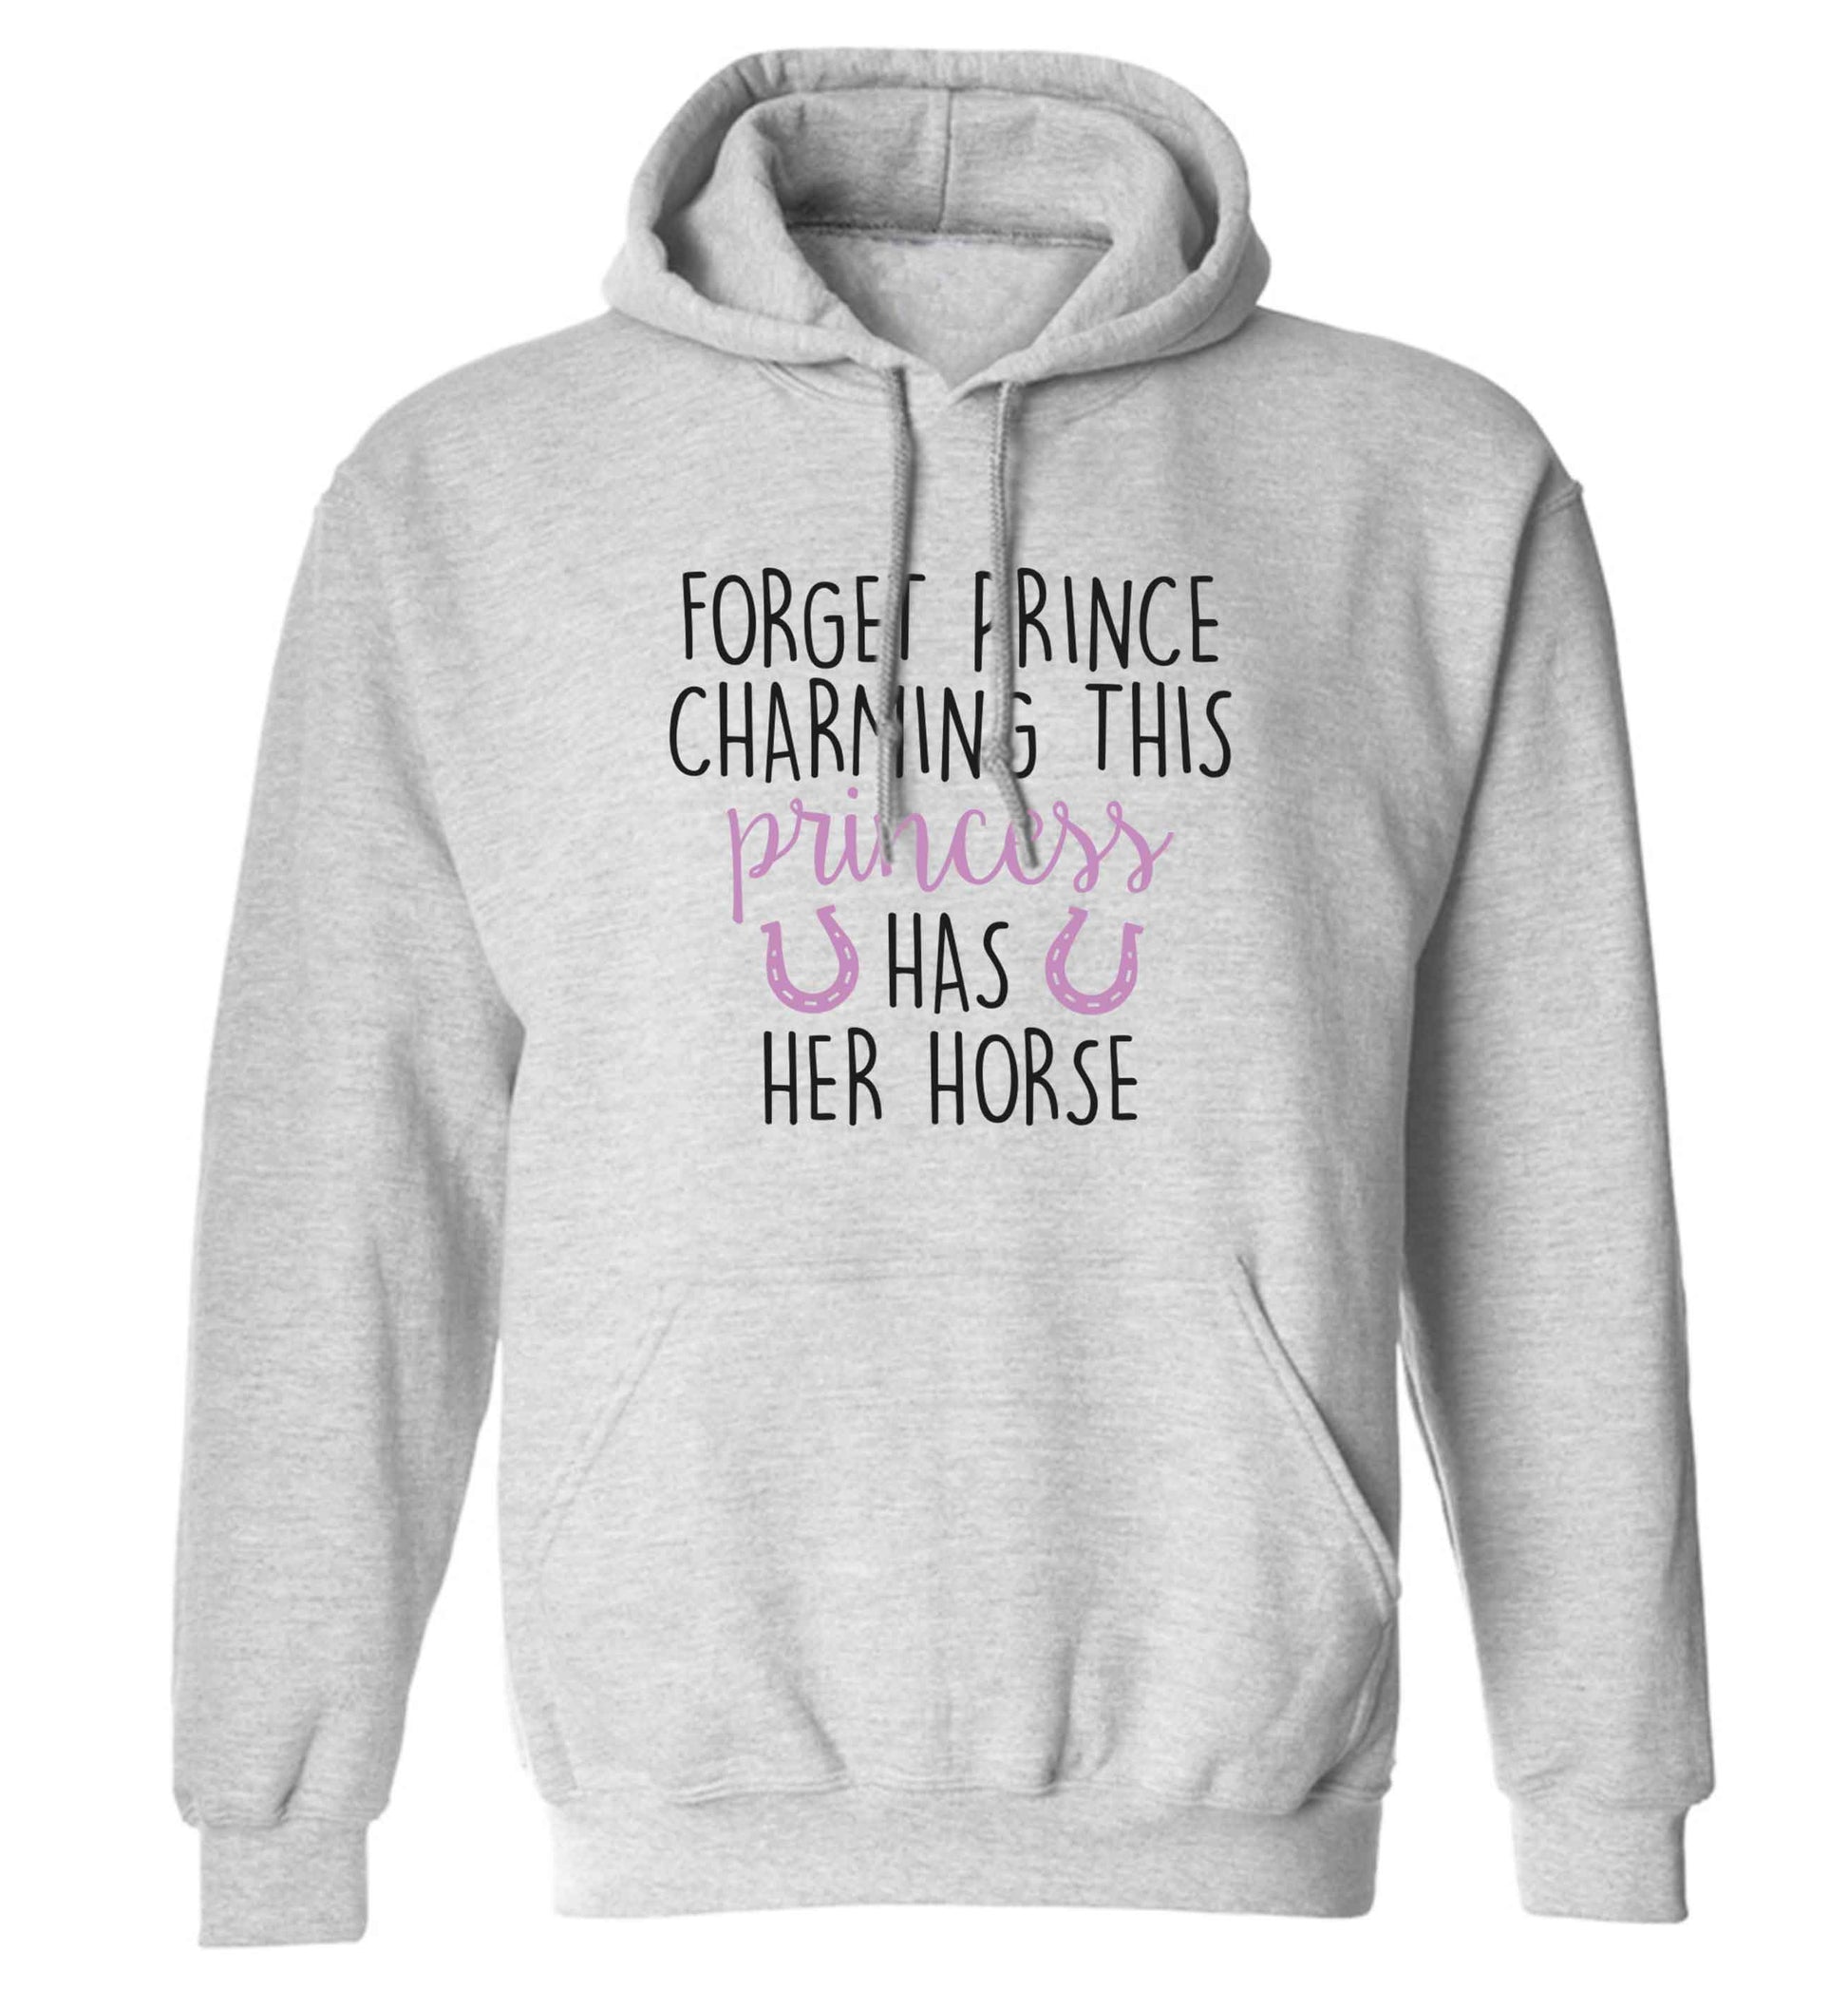 Forget prince charming this princess has her horse adults unisex grey hoodie 2XL